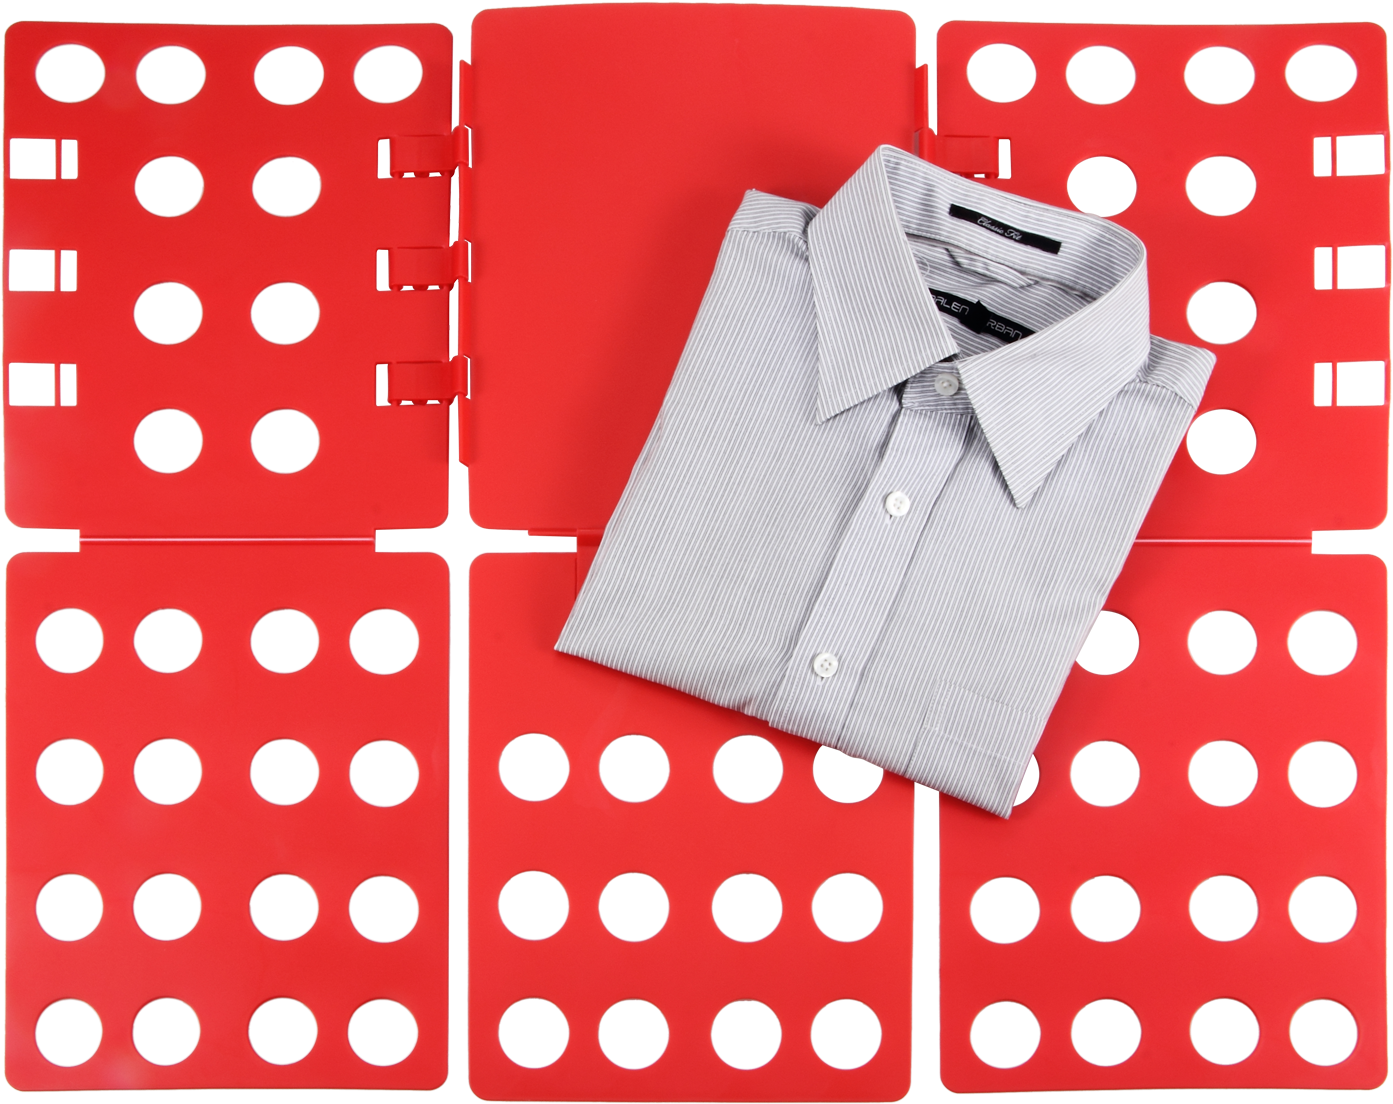 A Folded Shirt On A Red Surface